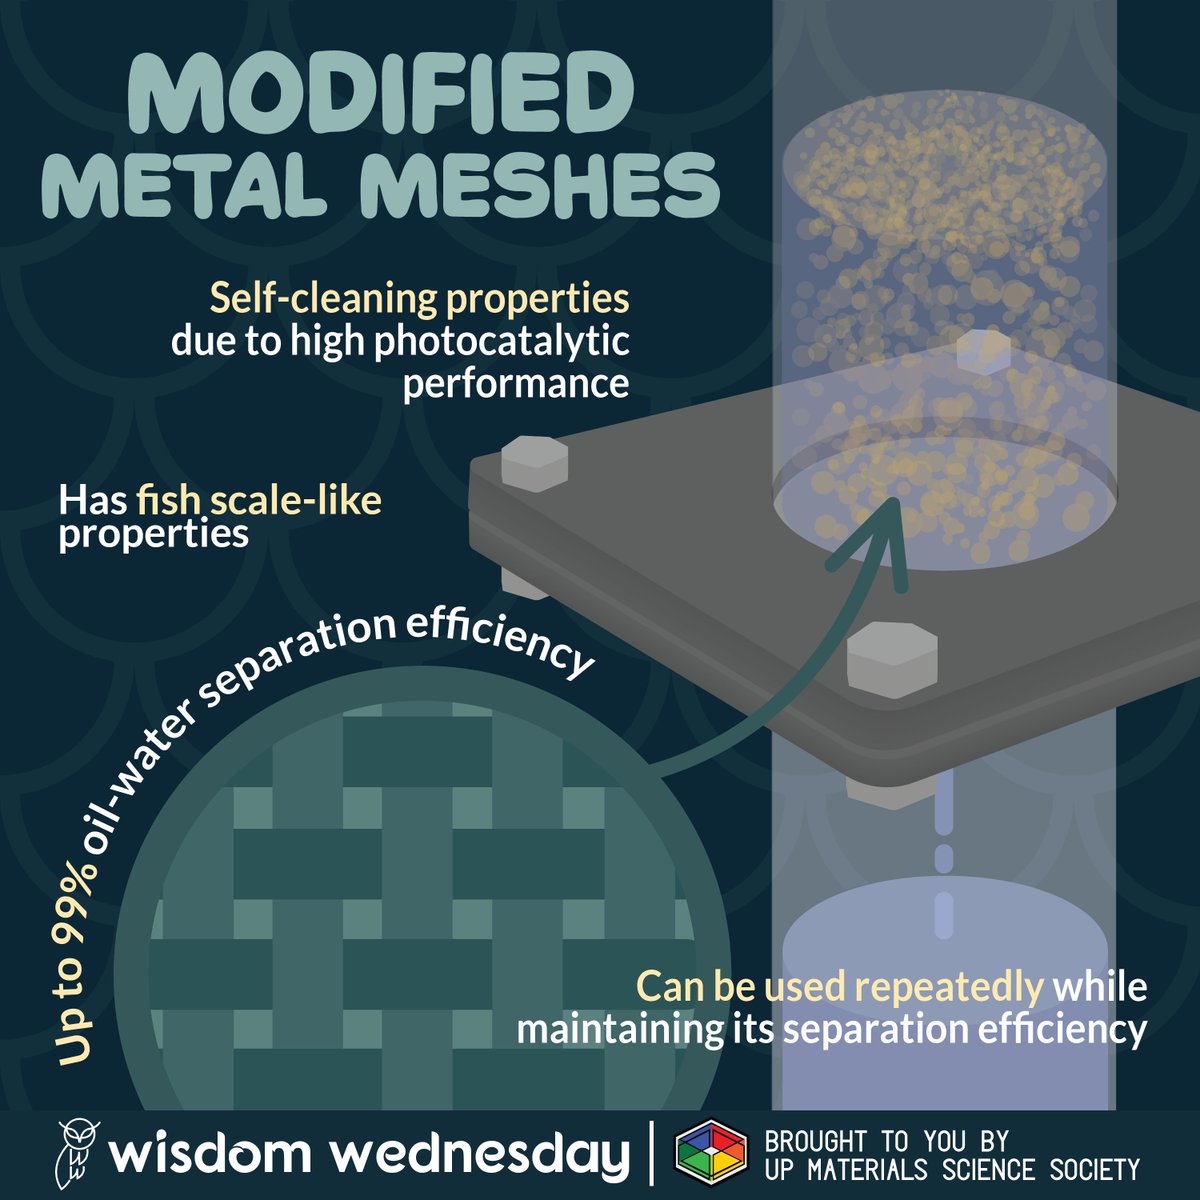 This metal doesn't mesh around! Find out how these surface-modified metal meshes separate oil from water and more in this week's Wisdom Wednesday!

READ MORE: tinyurl.com/WW2324-17

#WisdomWednesday
#MaterialsScience
#MetalMesh
#SurfaceModification